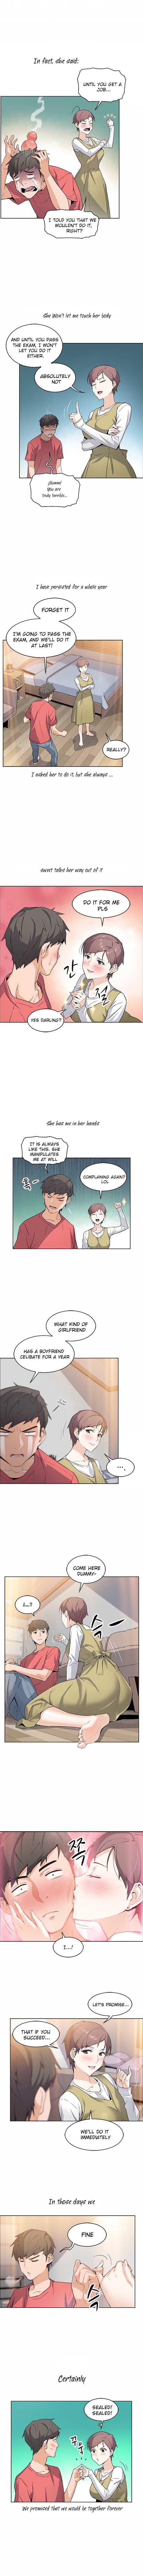 Vip Housekeeper [Neck Pillow, Paper] Ch.49/49 [English] [Manhwa PDF] Completed Stud - Page 7